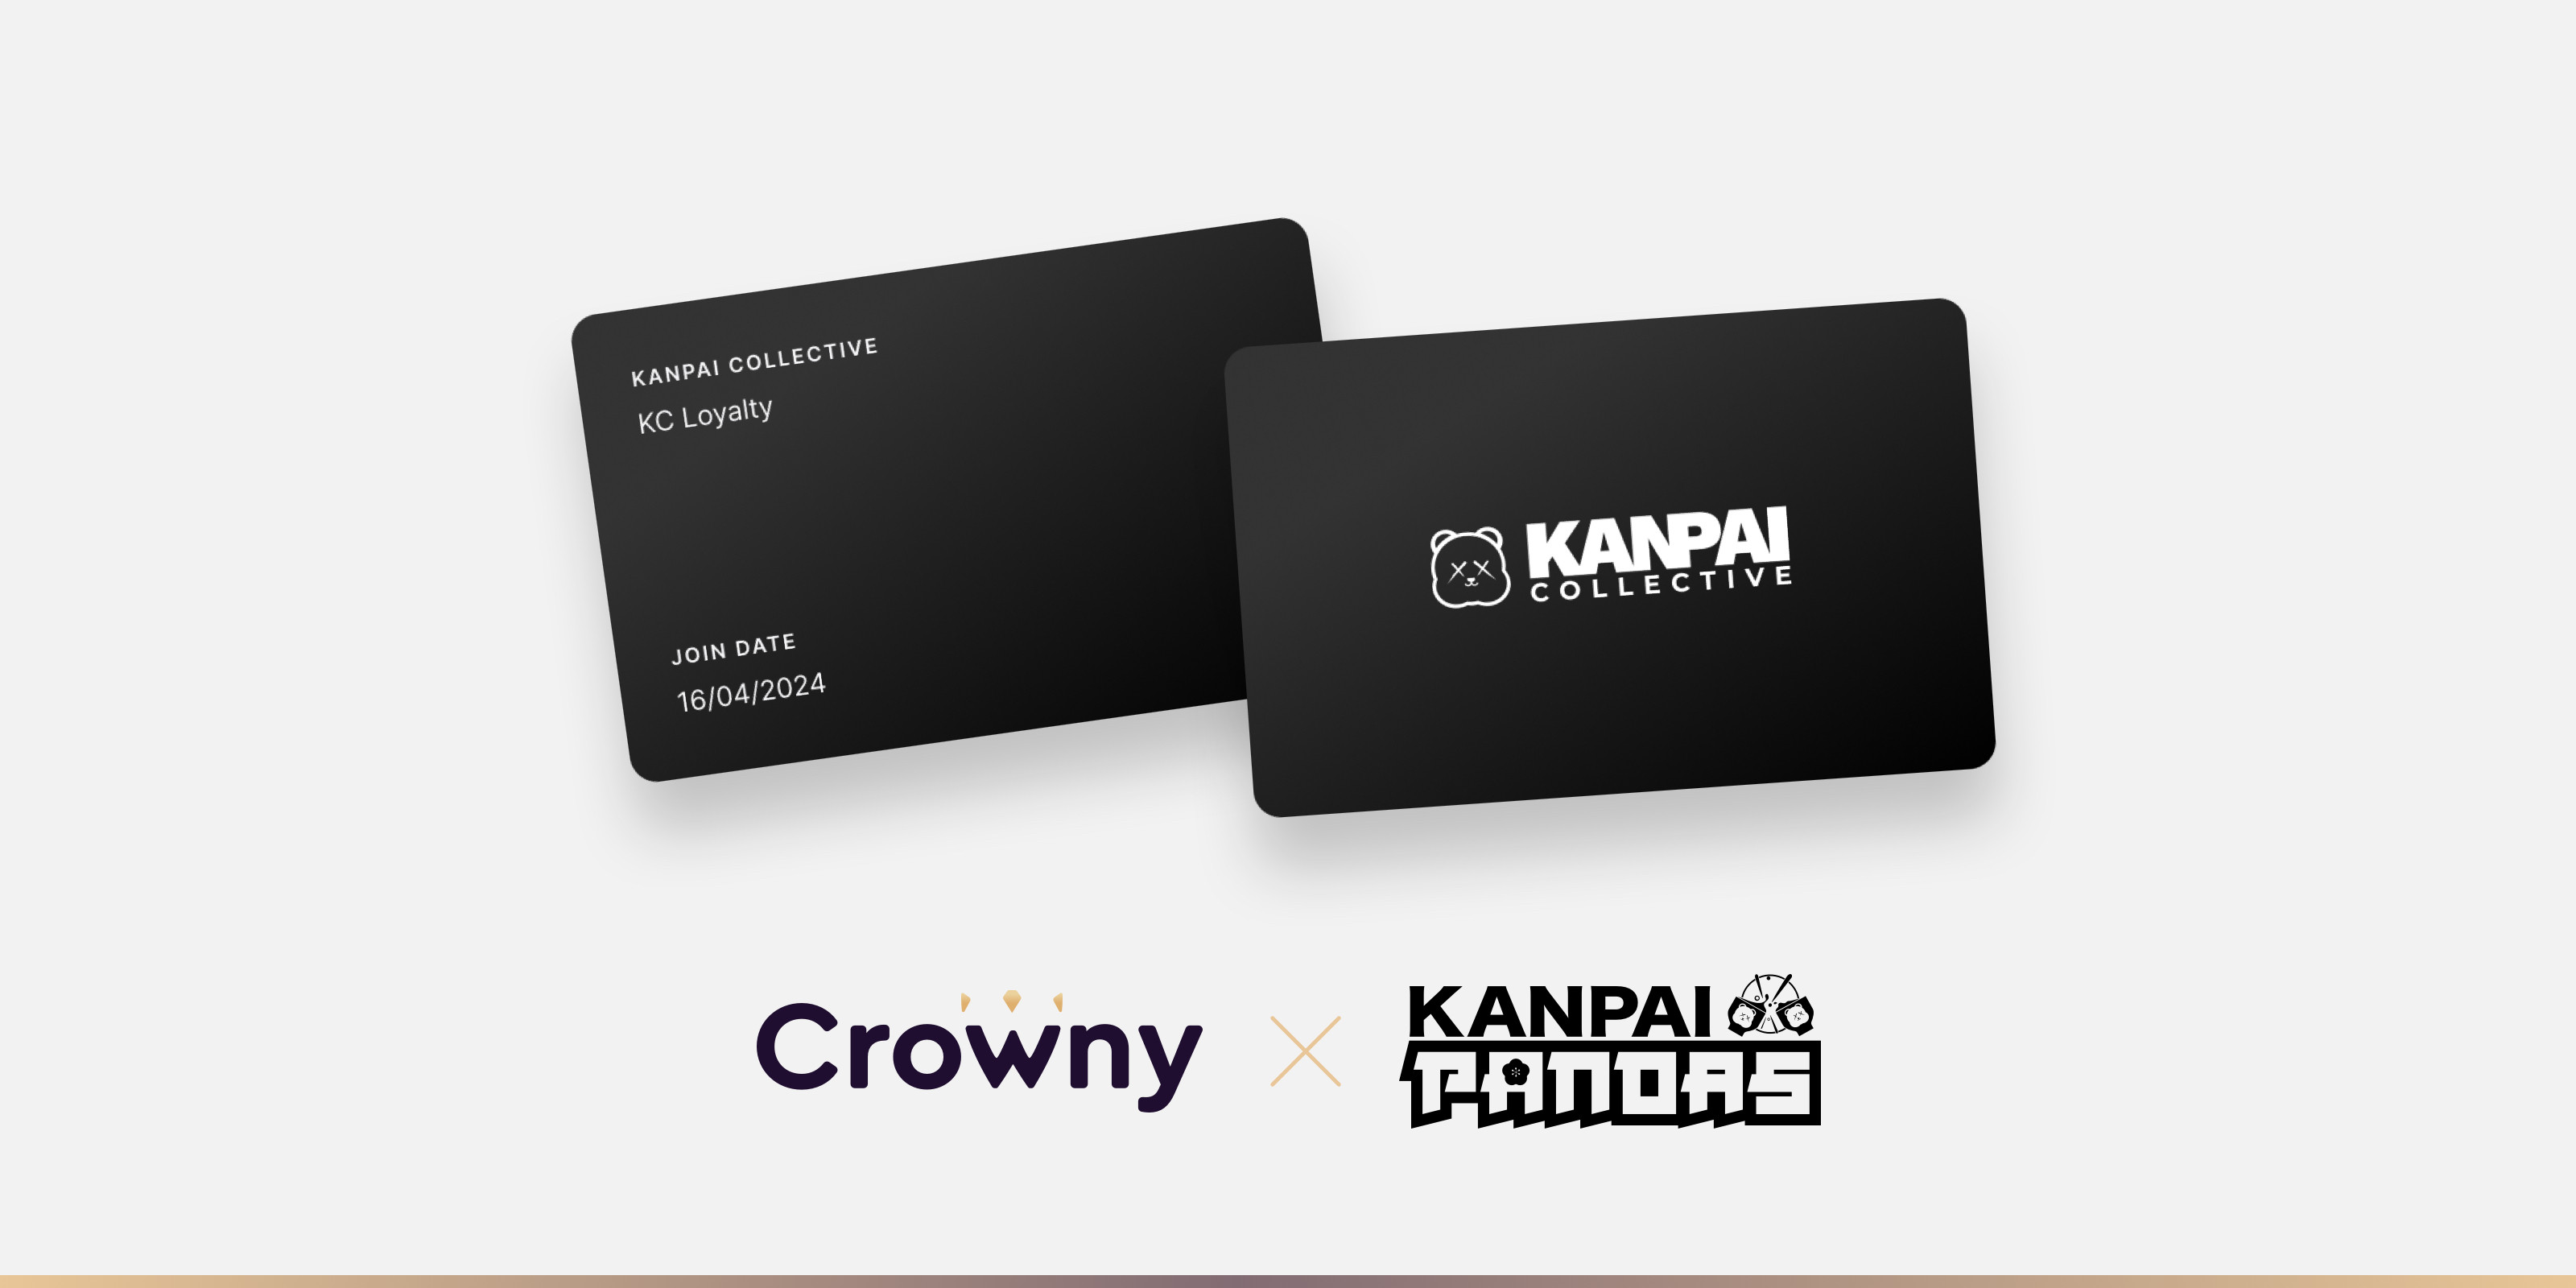 Kanpai Collective loyalty card in the Crowny App